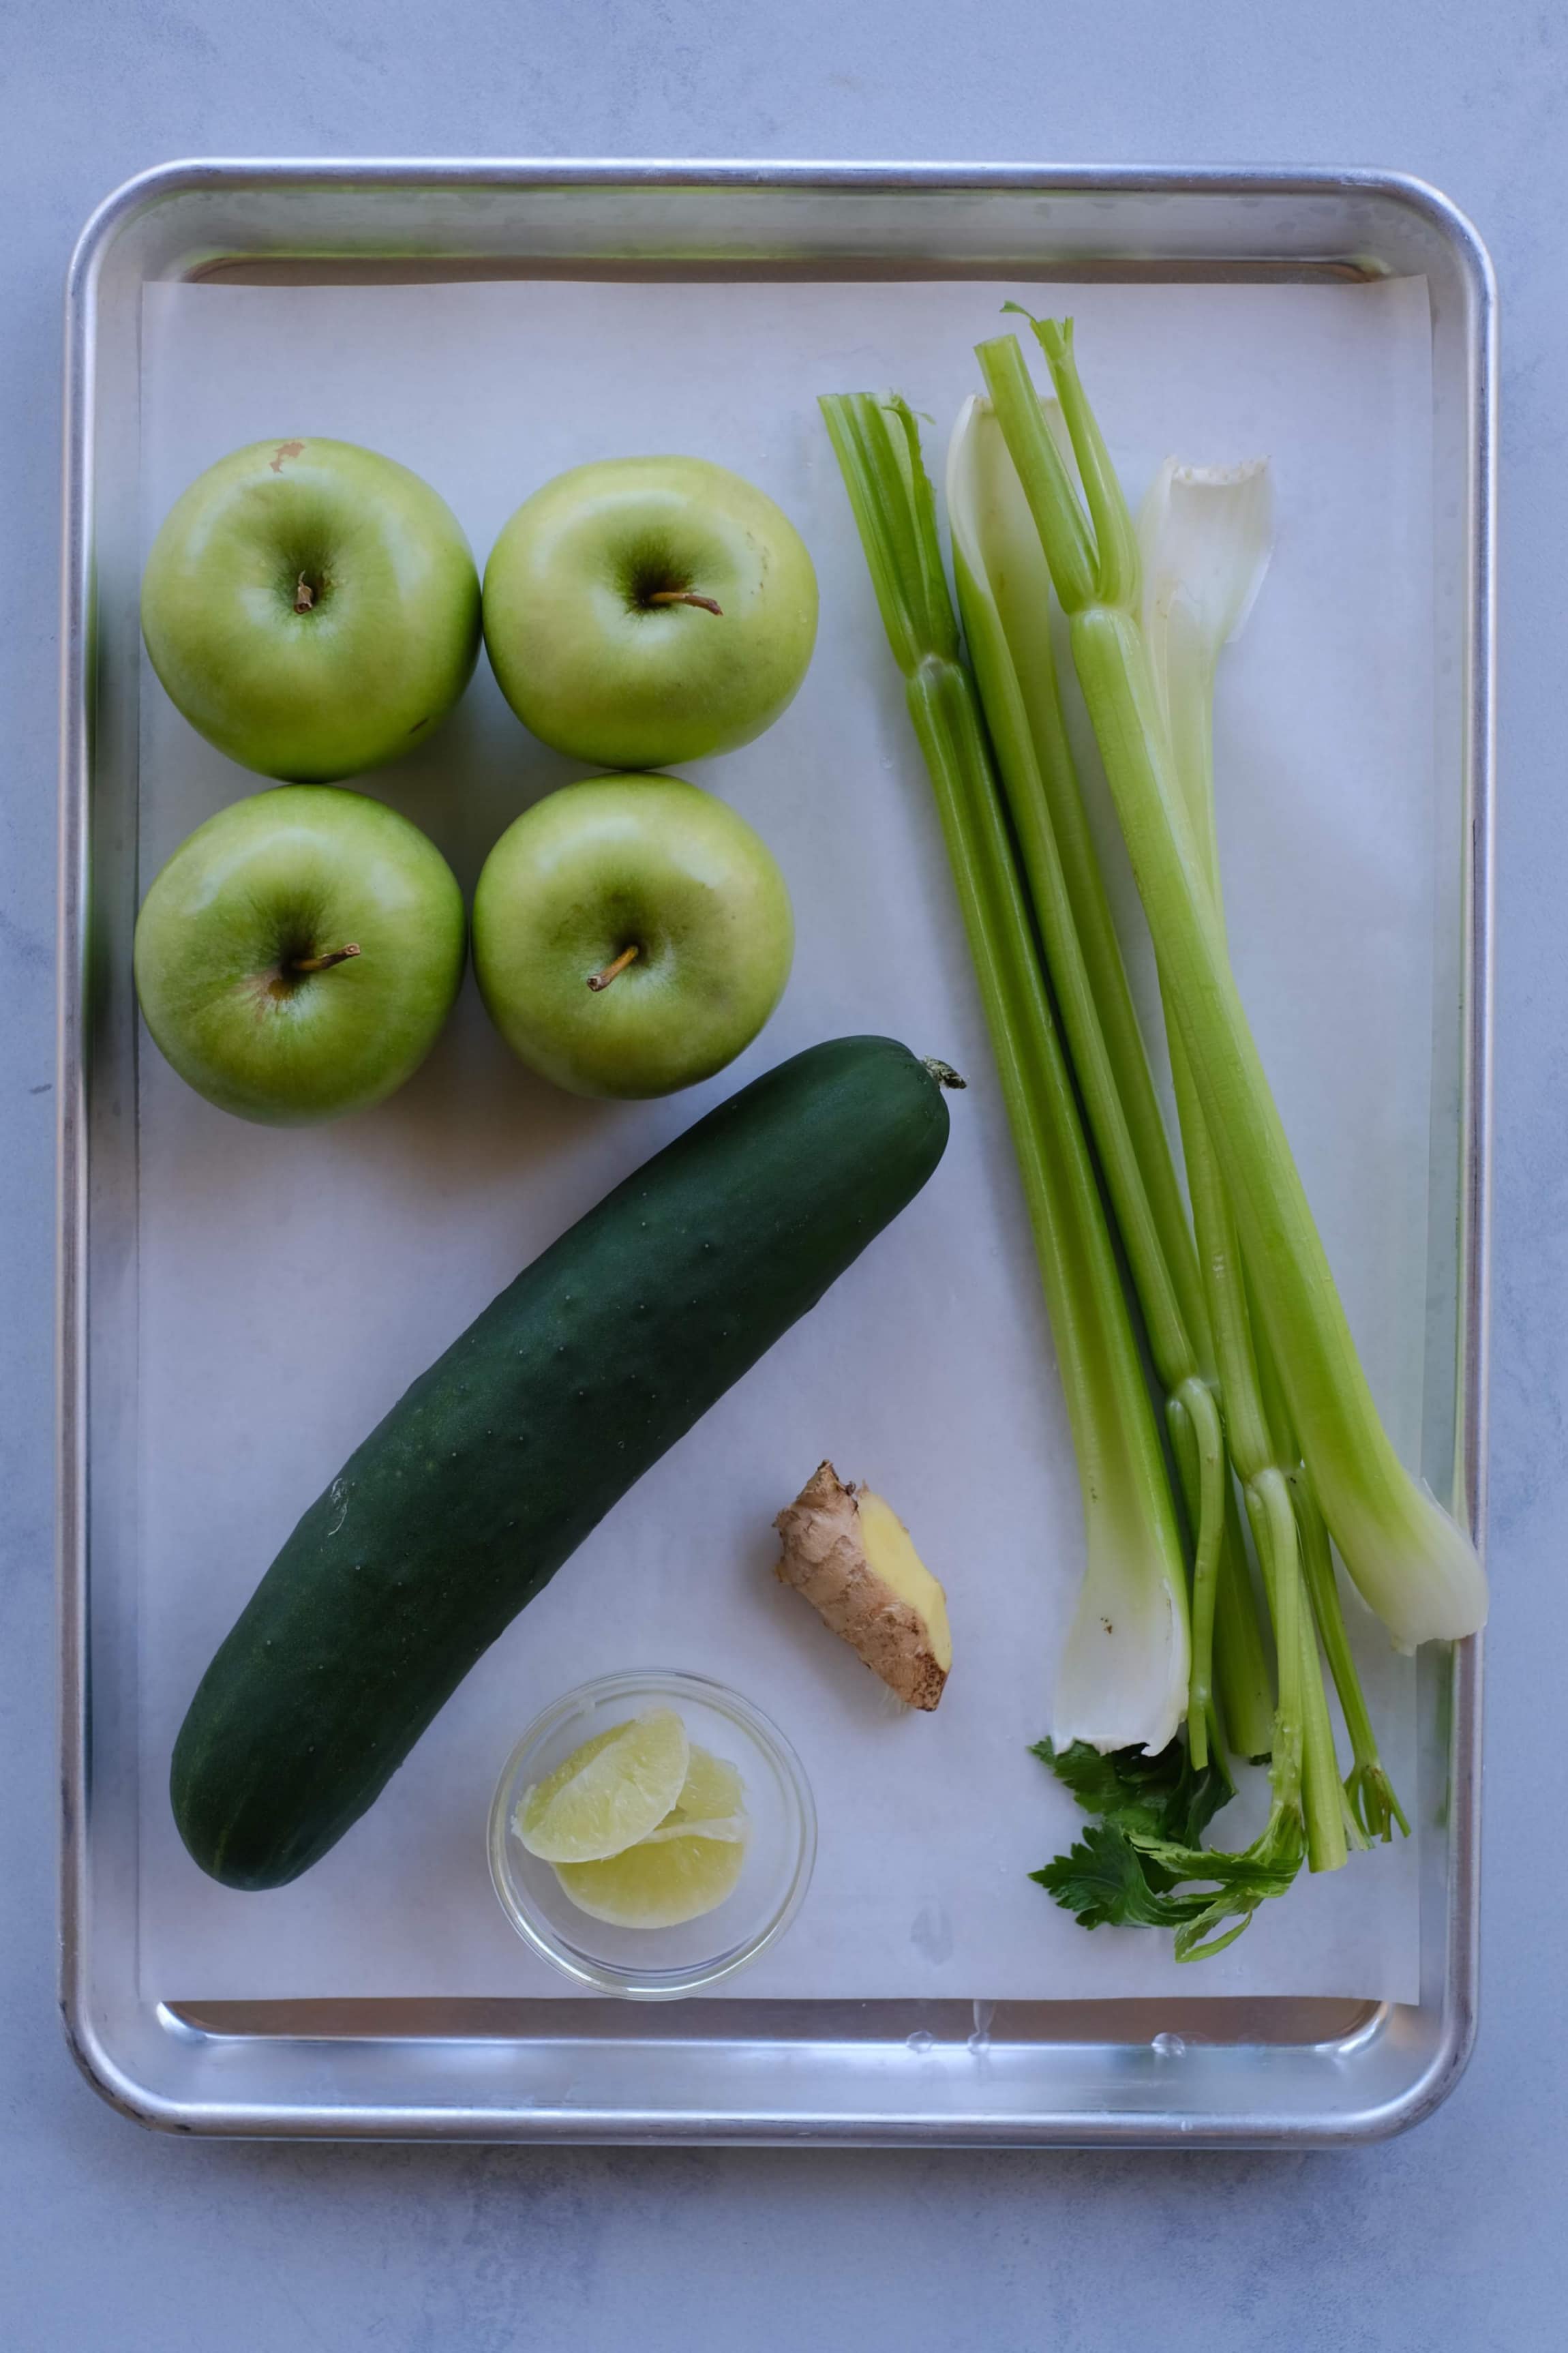 apple and vegetable on a tray